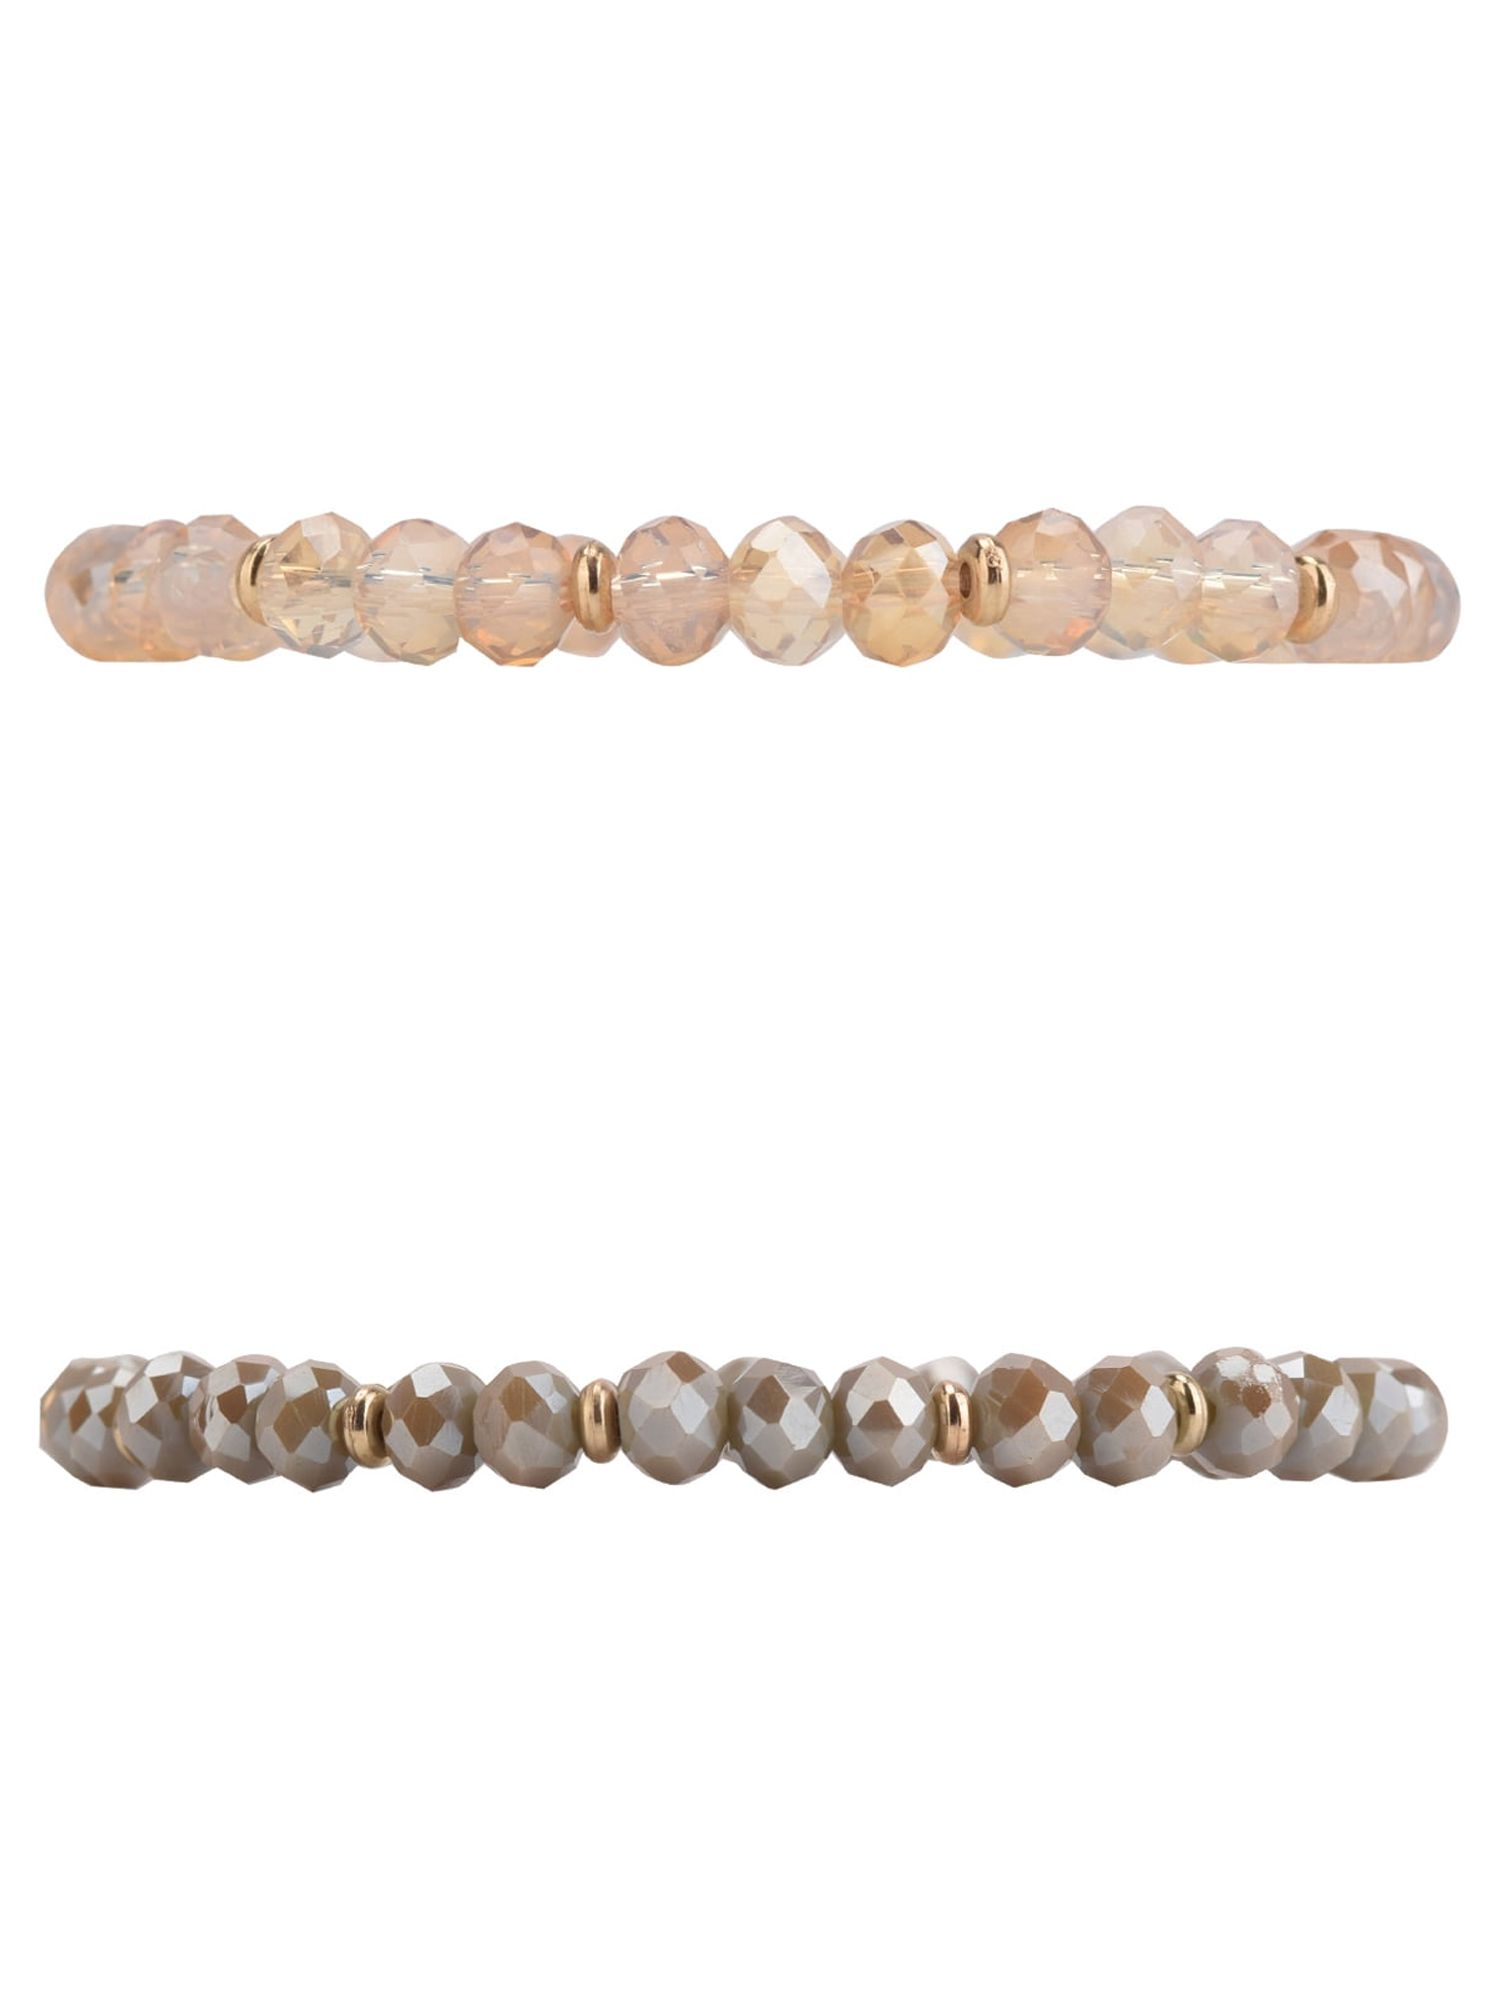 The Pioneer Woman - Women's Jewelry, Soft Gold-tone Bracelet Set with Genuine Stone Beads - image 5 of 7